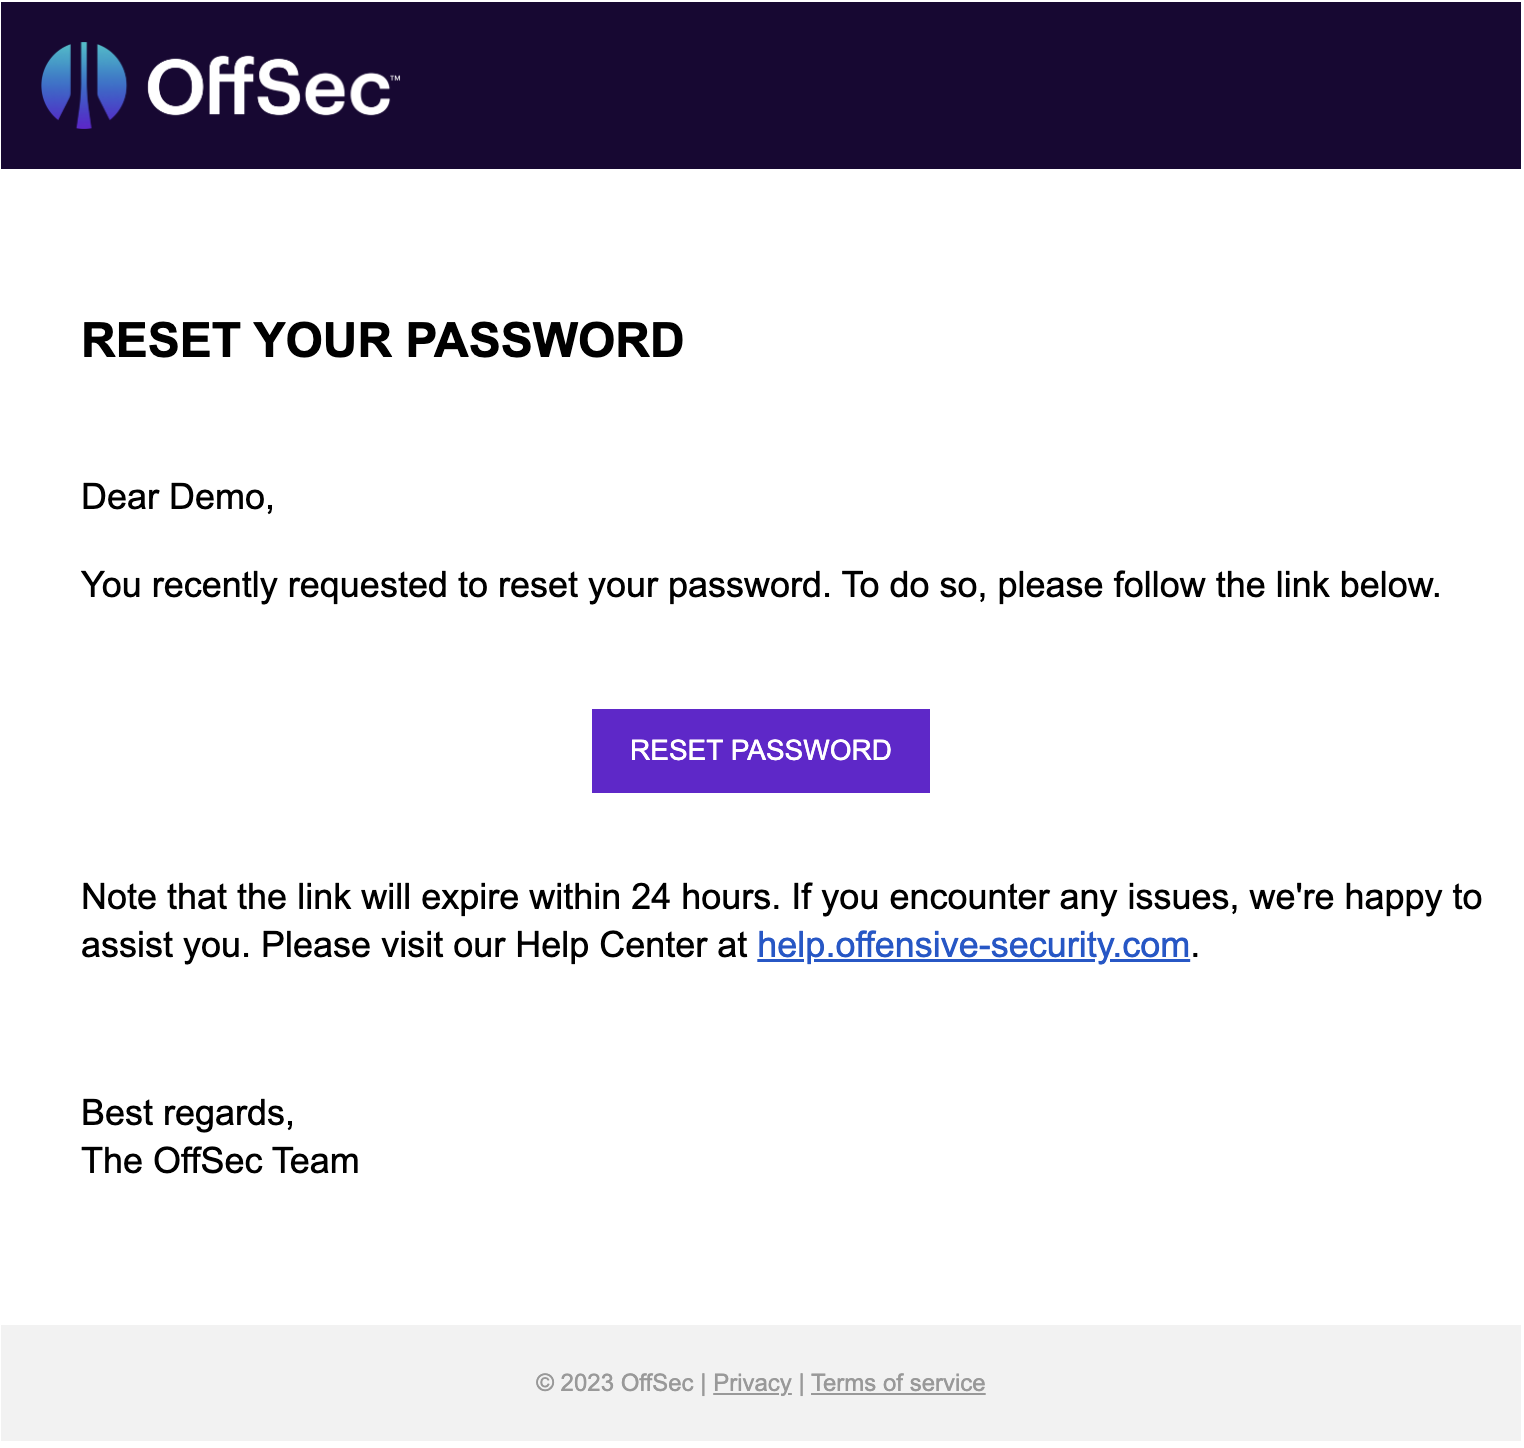 Reset_Password_Email.png